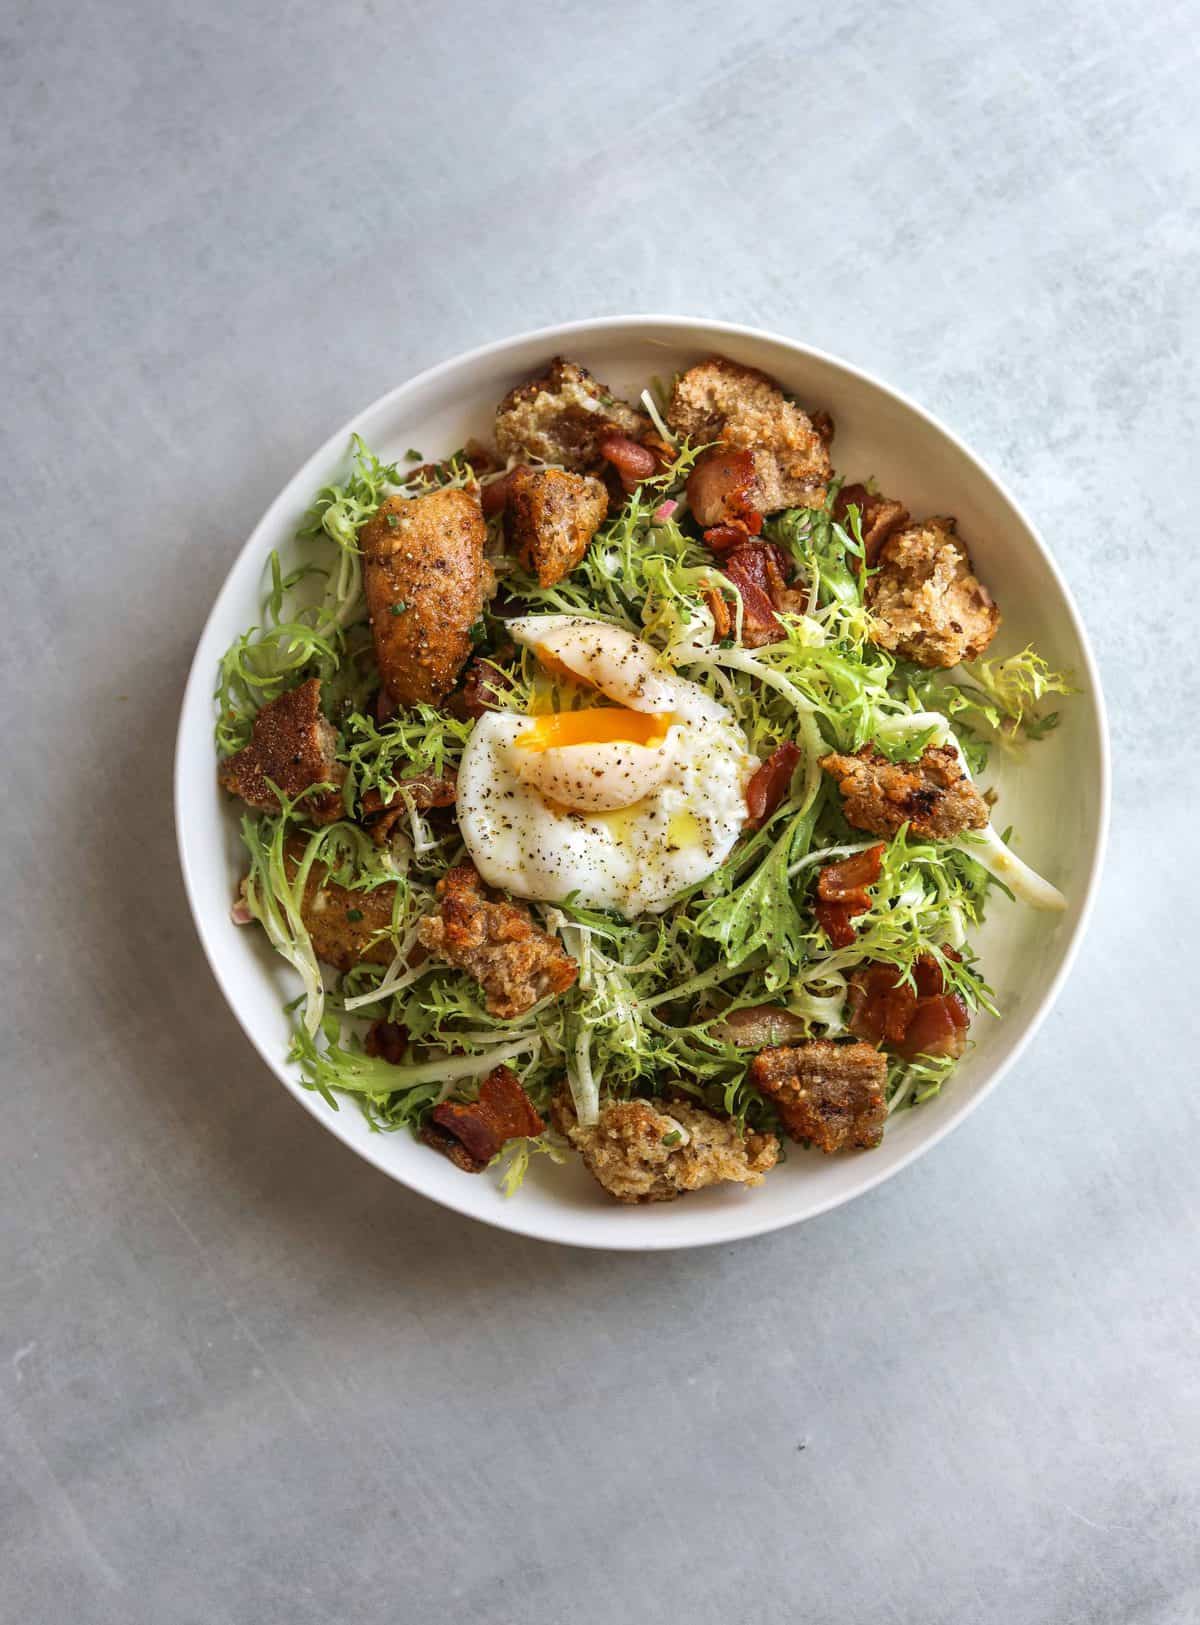 Frisee Salad With Bacon Croutons And Poached Egg Craving California